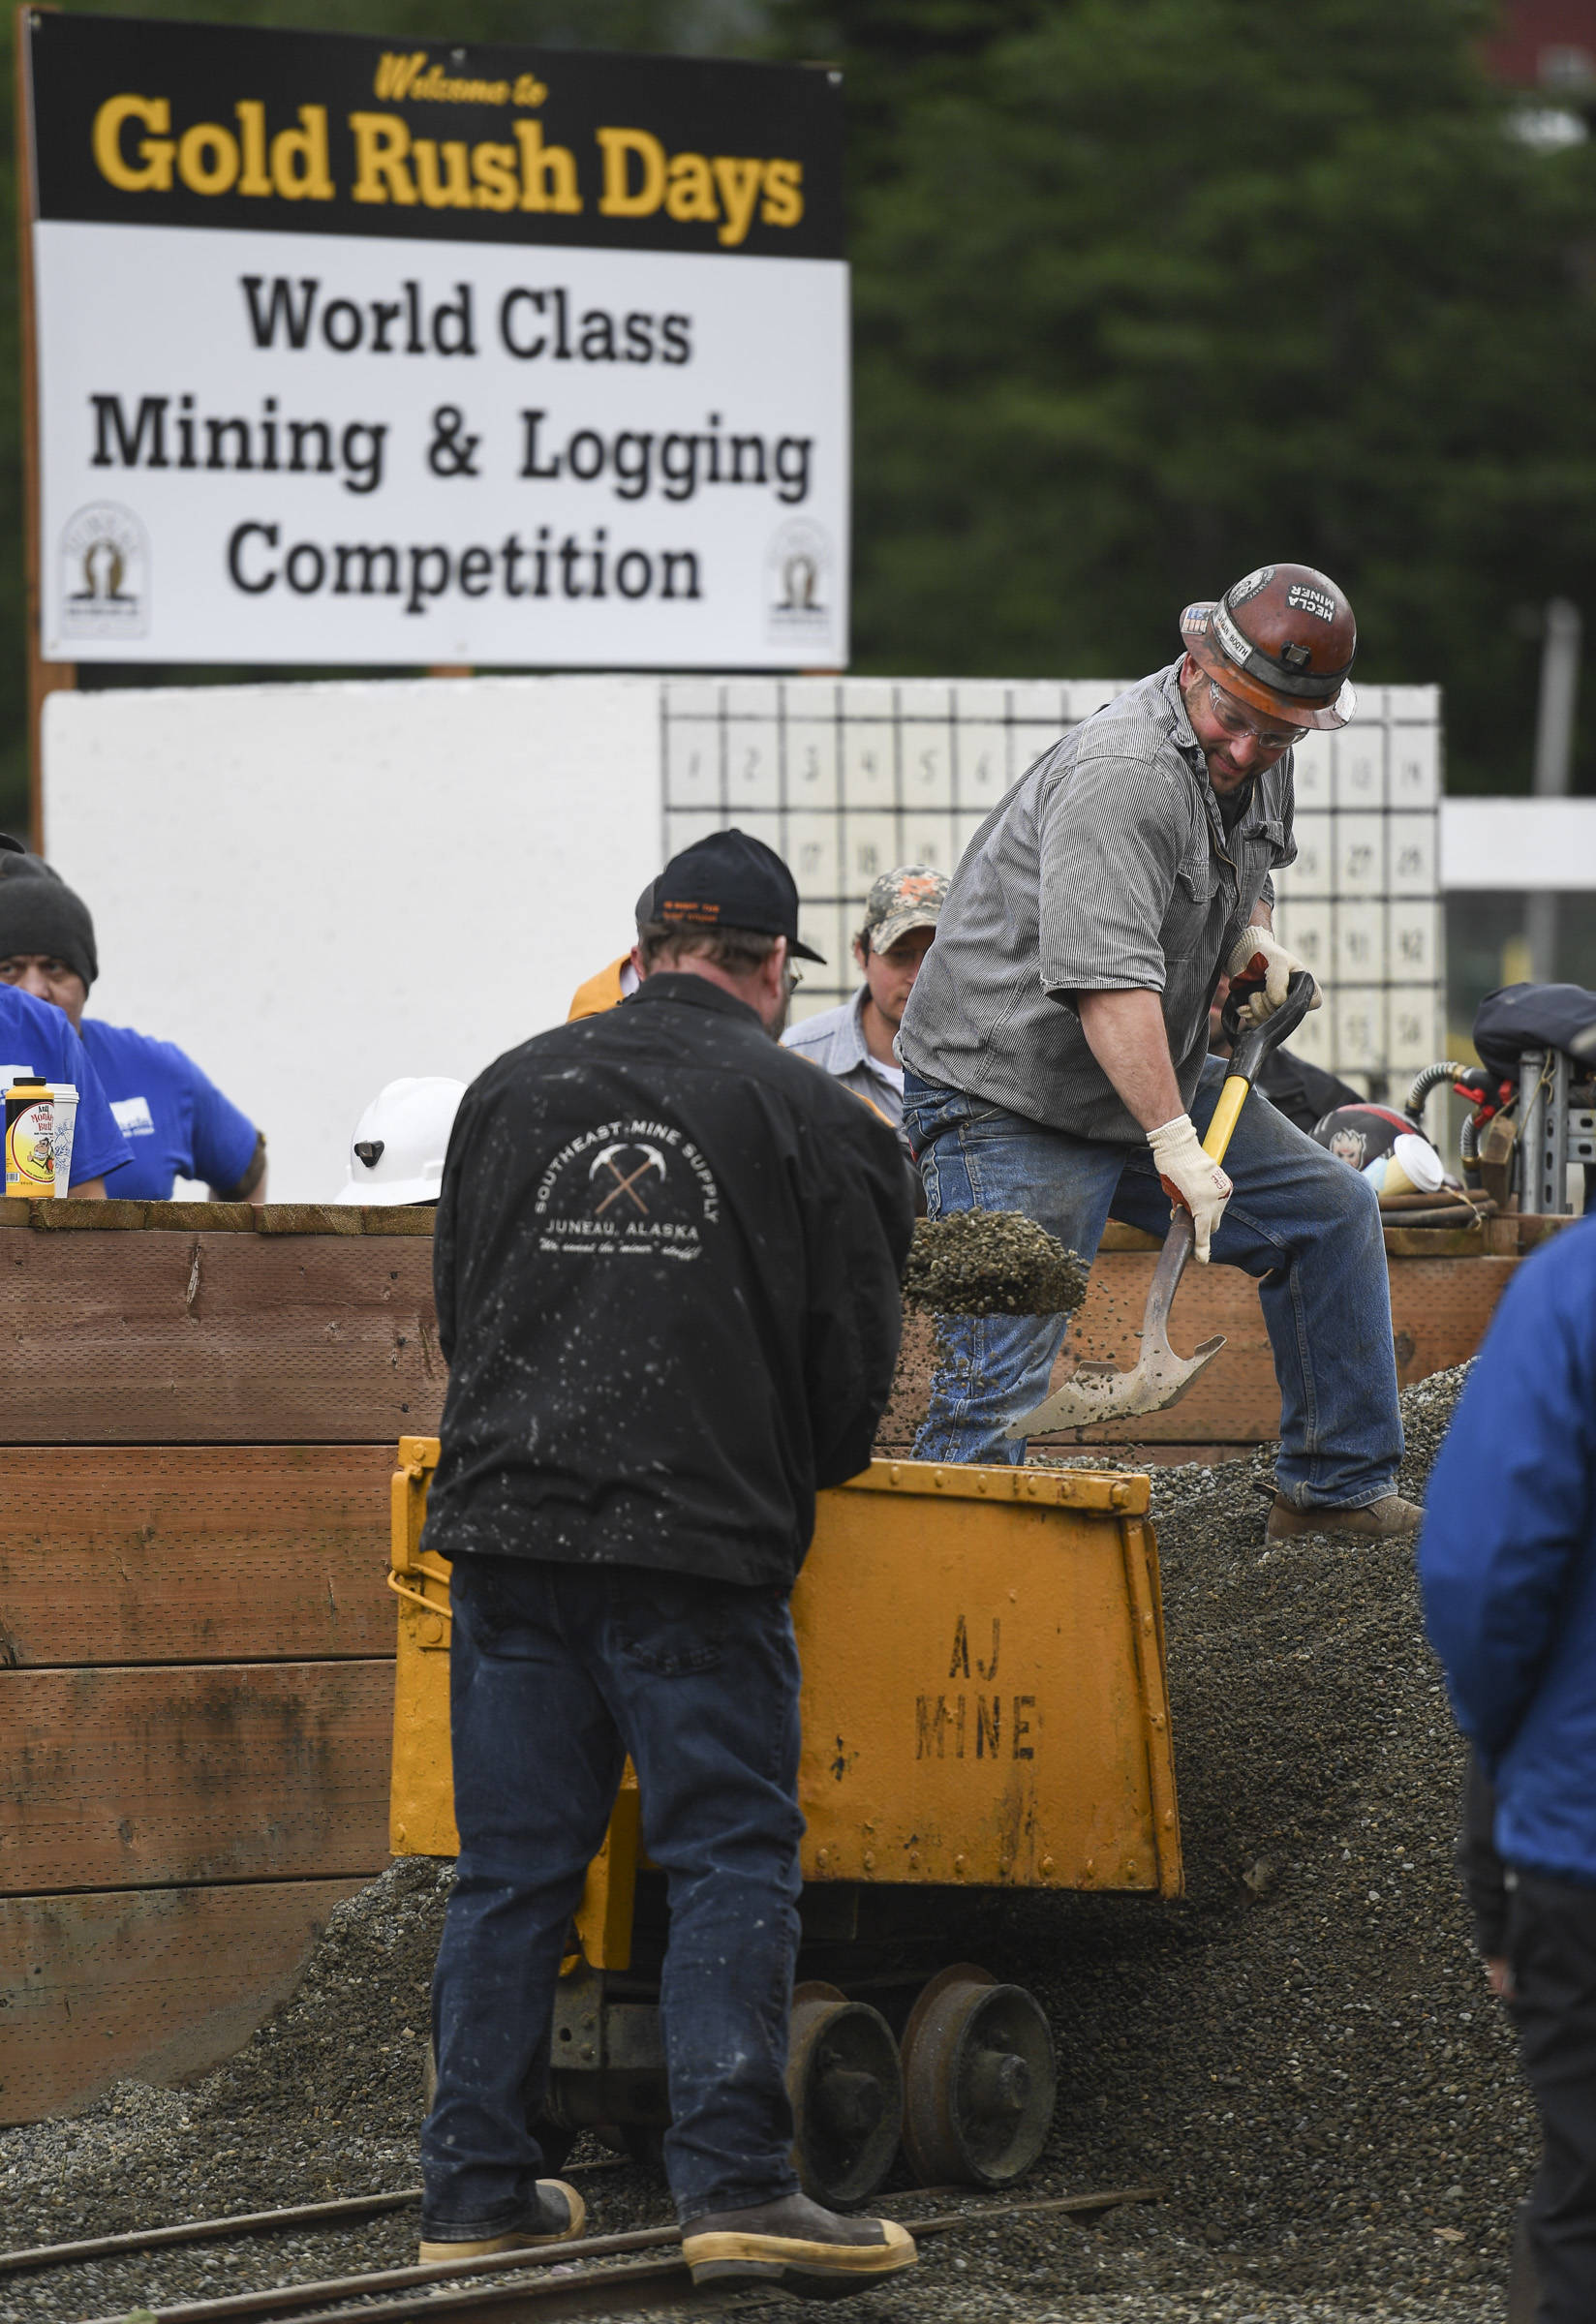 Ryan Friend competes in the hand mucking contest during the Mining & Logging Competition at the 29th Annual Gold Rush Days at Savikko Park on Saturday, June 22, 2019. (Michael Penn | Juneau Empire)